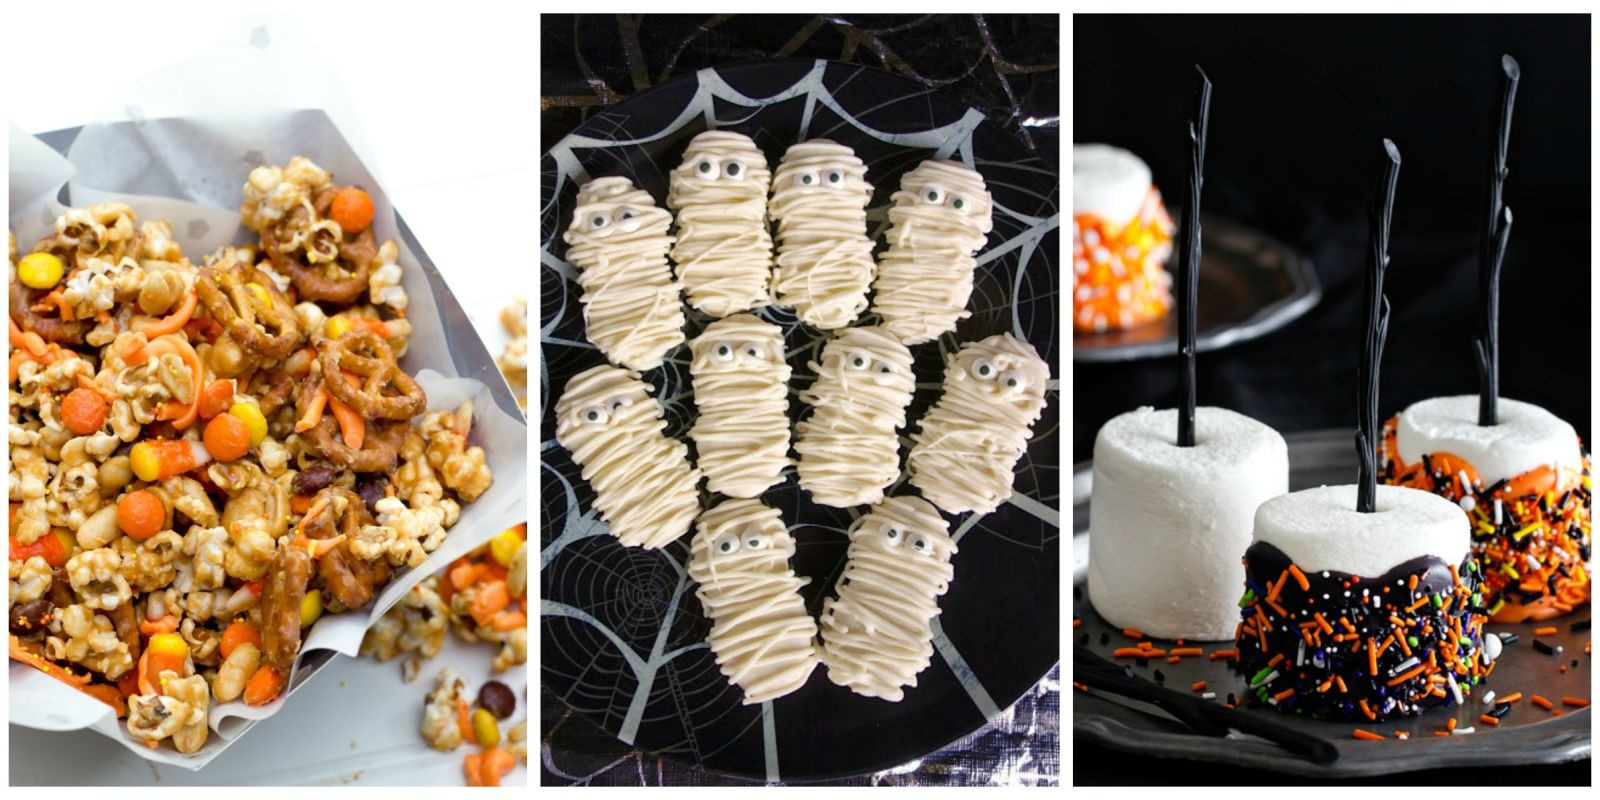 Easy Work Party Food Ideas
 22 Easy Halloween Party Food Ideas Cute Recipes for